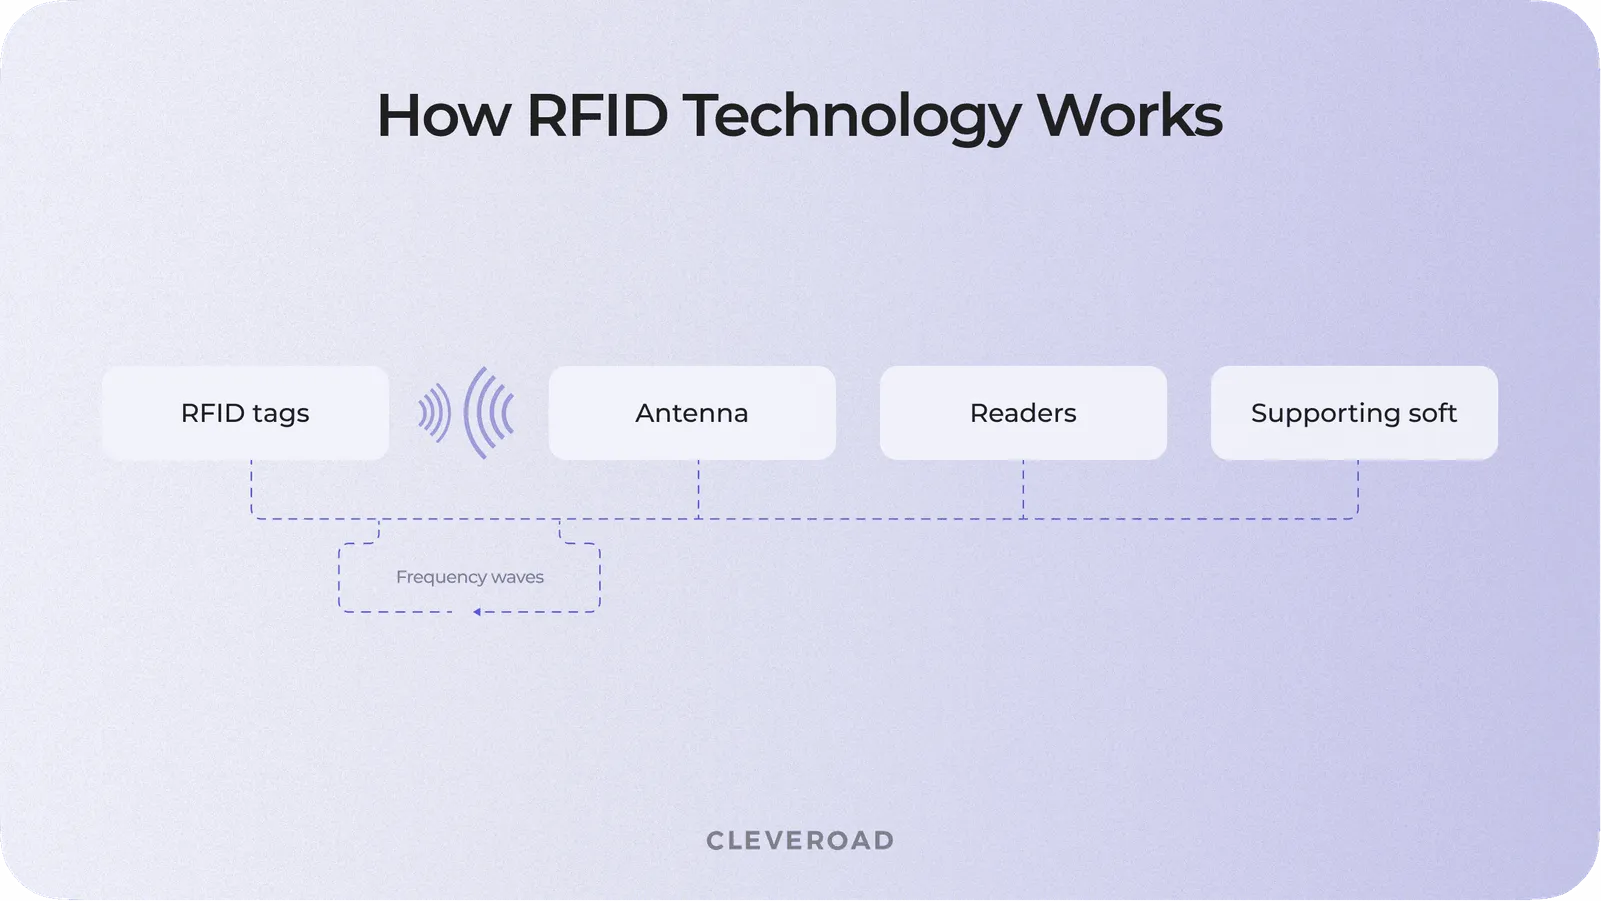 What is RFID technology